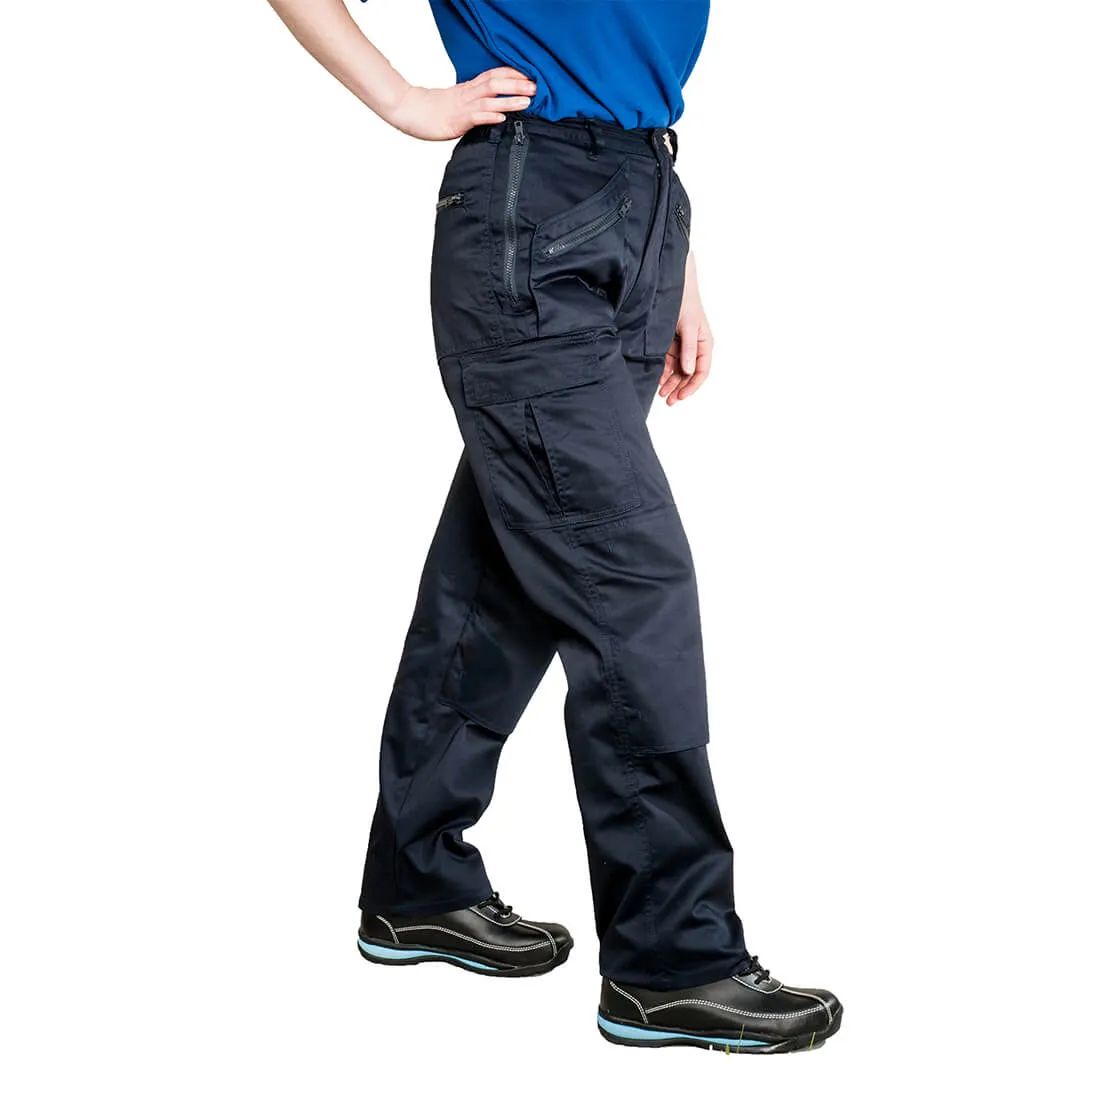 Portwest Ladies S687 Action Trousers - Navy Blue, Extra Large, 31"